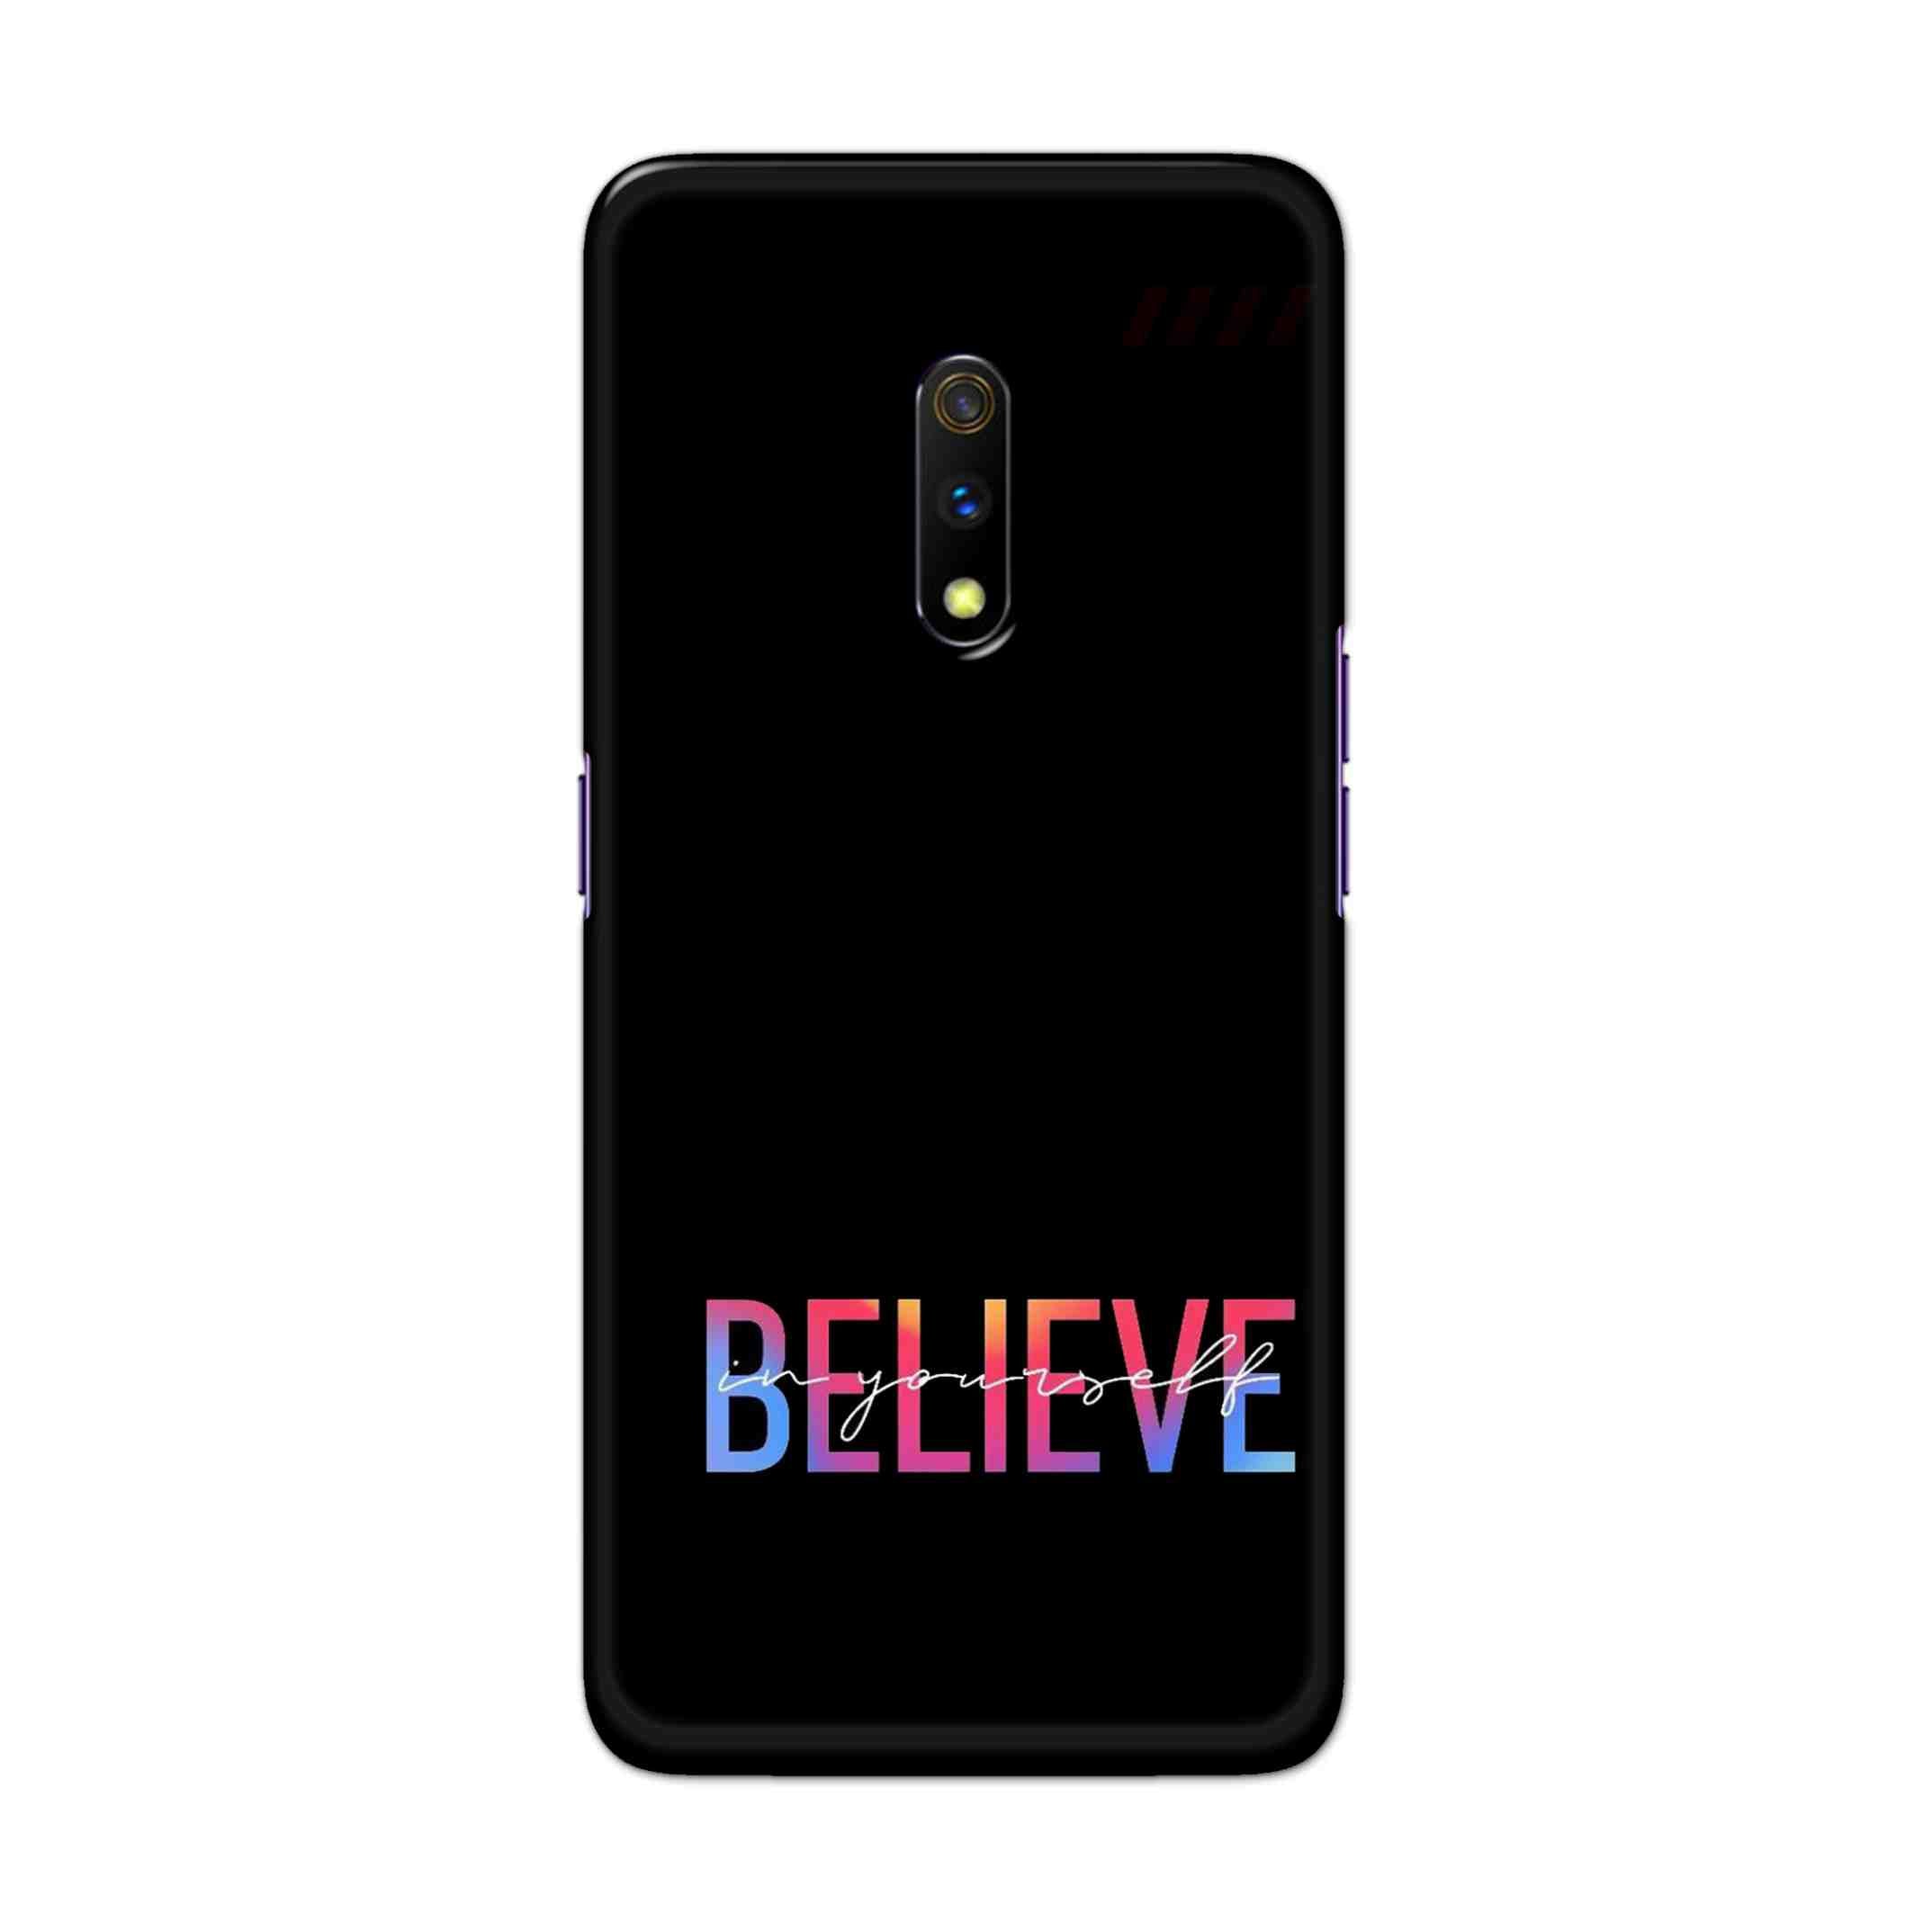 Buy Believe Hard Back Mobile Phone Case Cover For Oppo Realme X Online